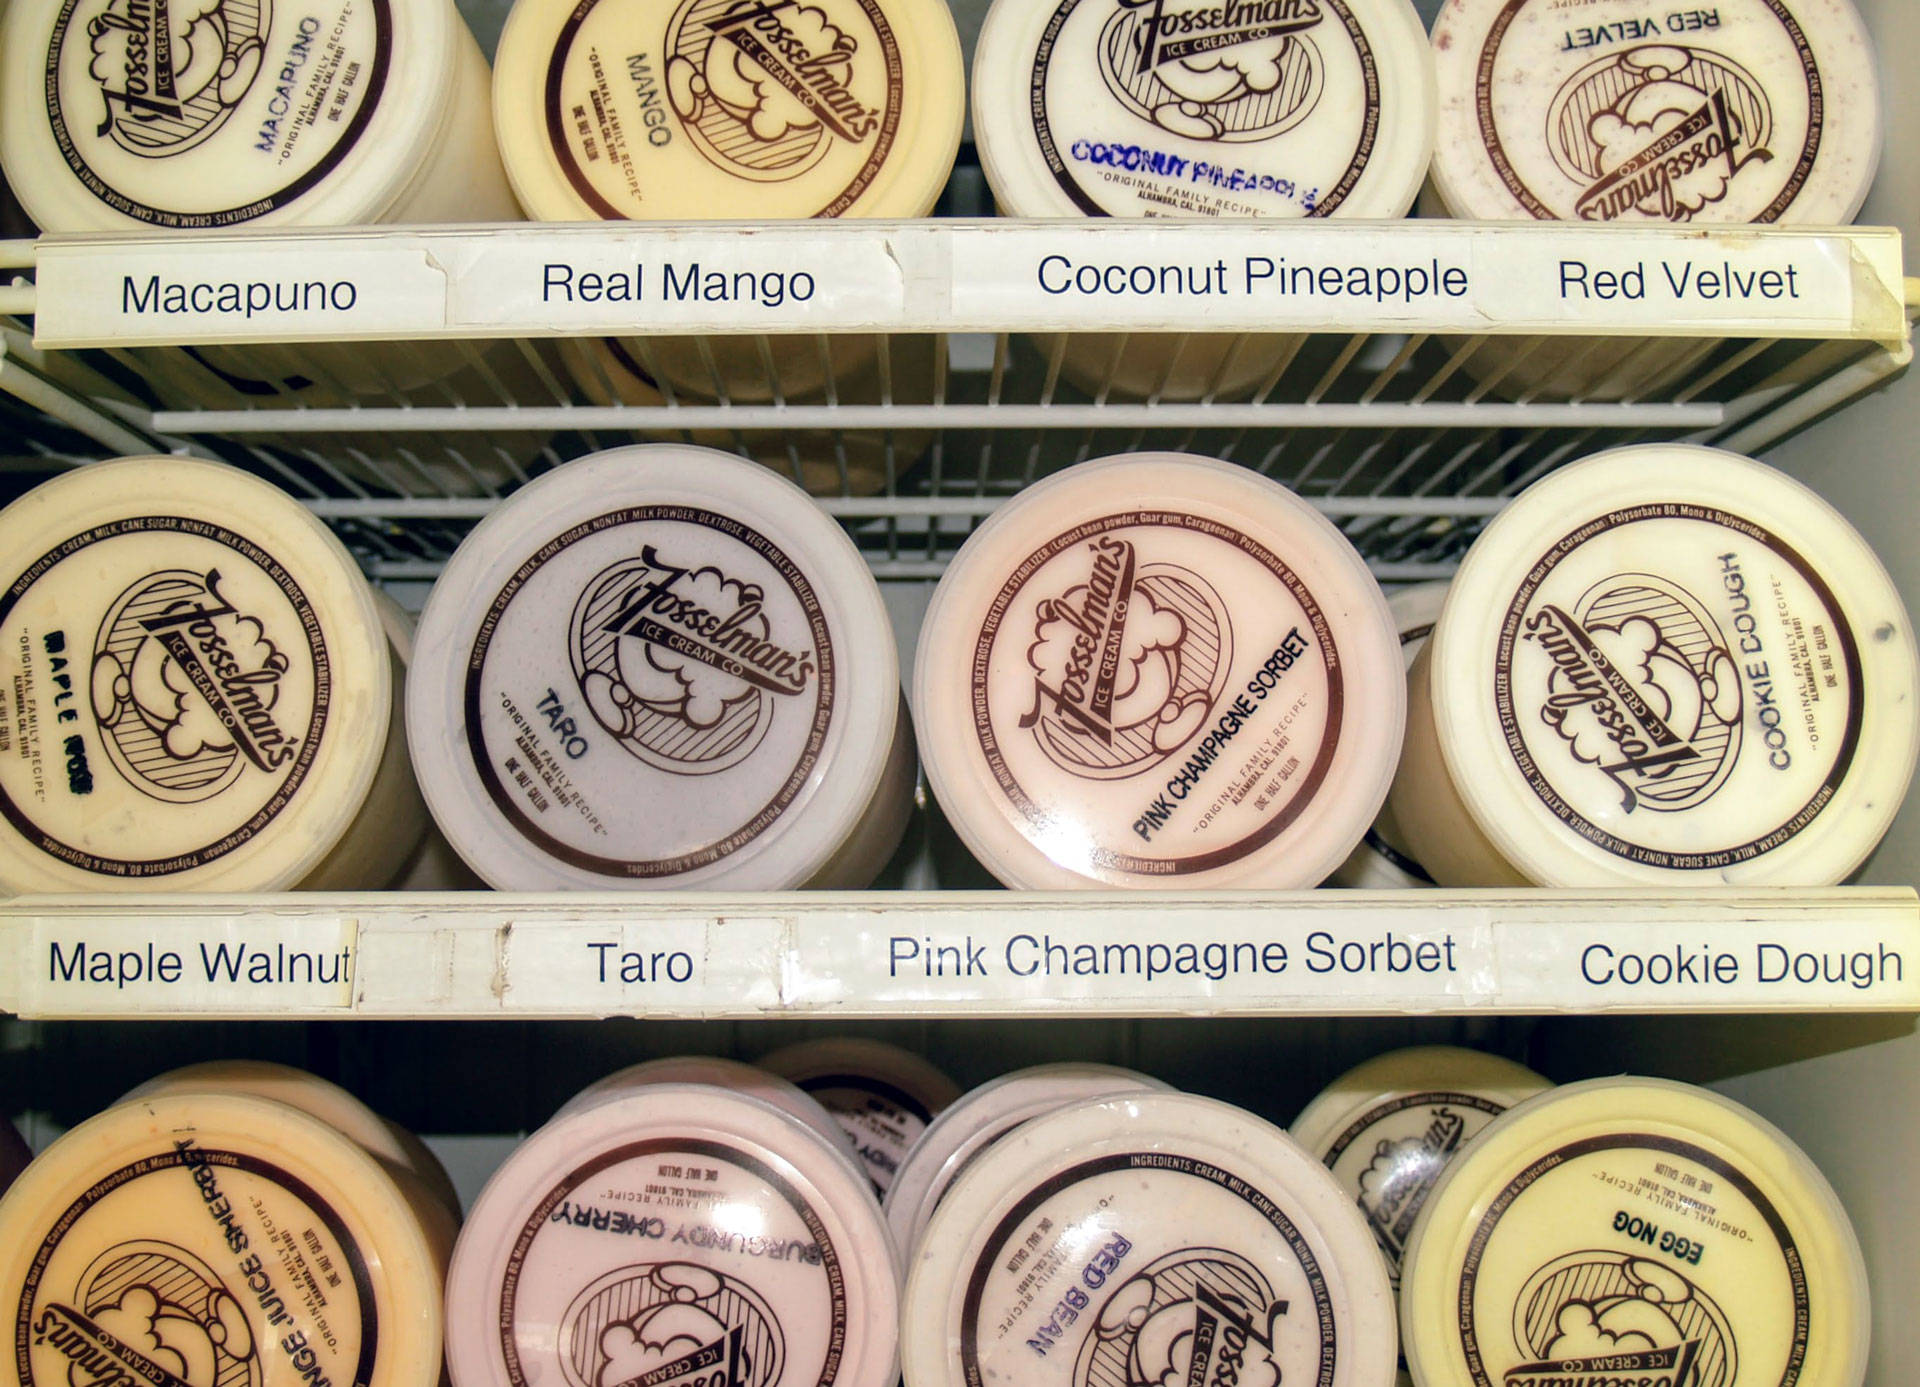 Fosselman's offers more than 200 ice cream flavors. Taro is one of the most popular. Elizabeth Aguilera/CALmatters